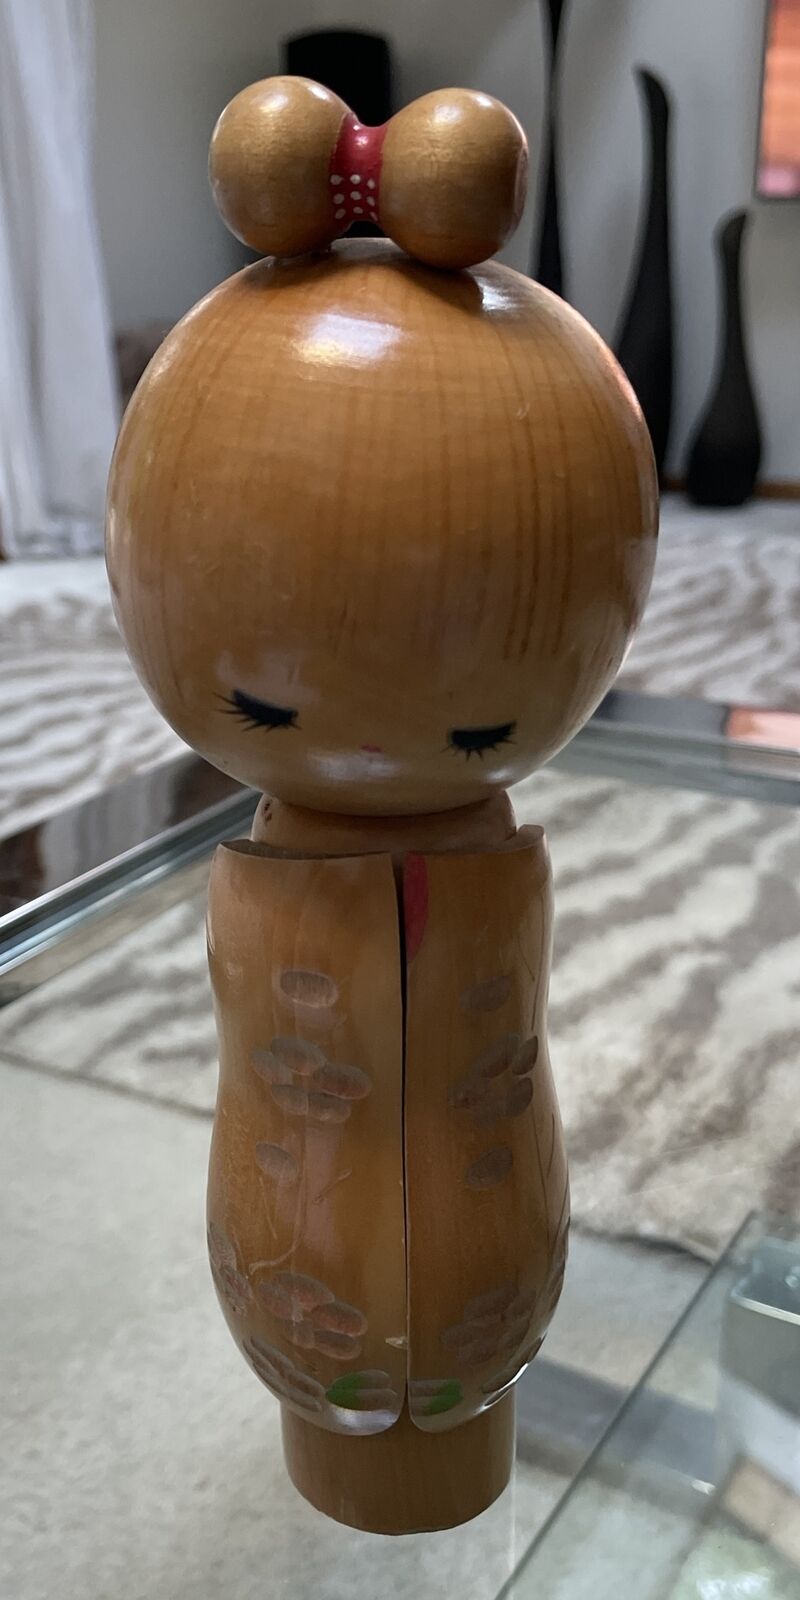 VTG JAPANESE KOKESHI WOODEN DOLL CARVED STATUE COLLECTOR PIECE HAND PAINTED 10”